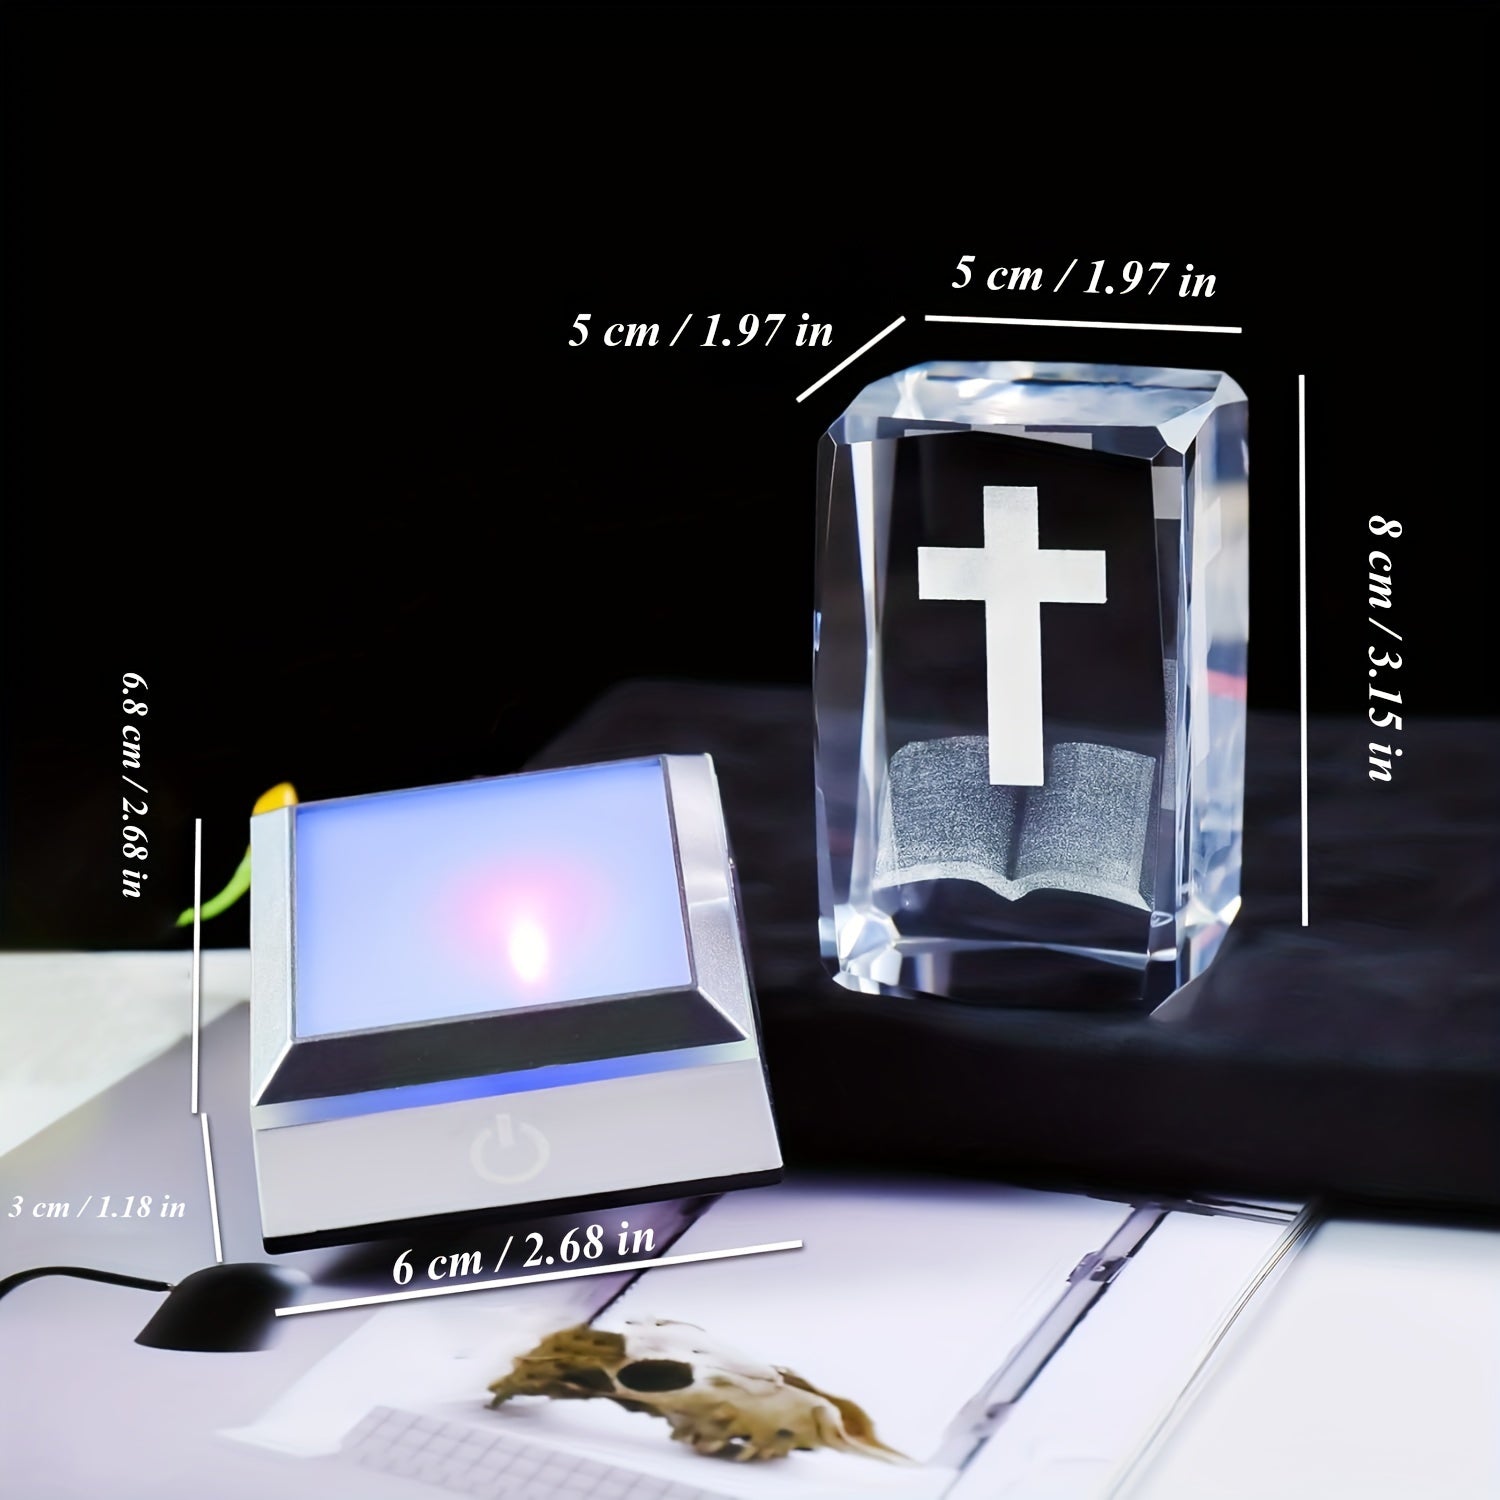 1pc Cross On Bible 3D Crystal With Multicolor LED Light Base, Christian Gift Idea 3.15*1.97*1.97in claimedbygoddesigns